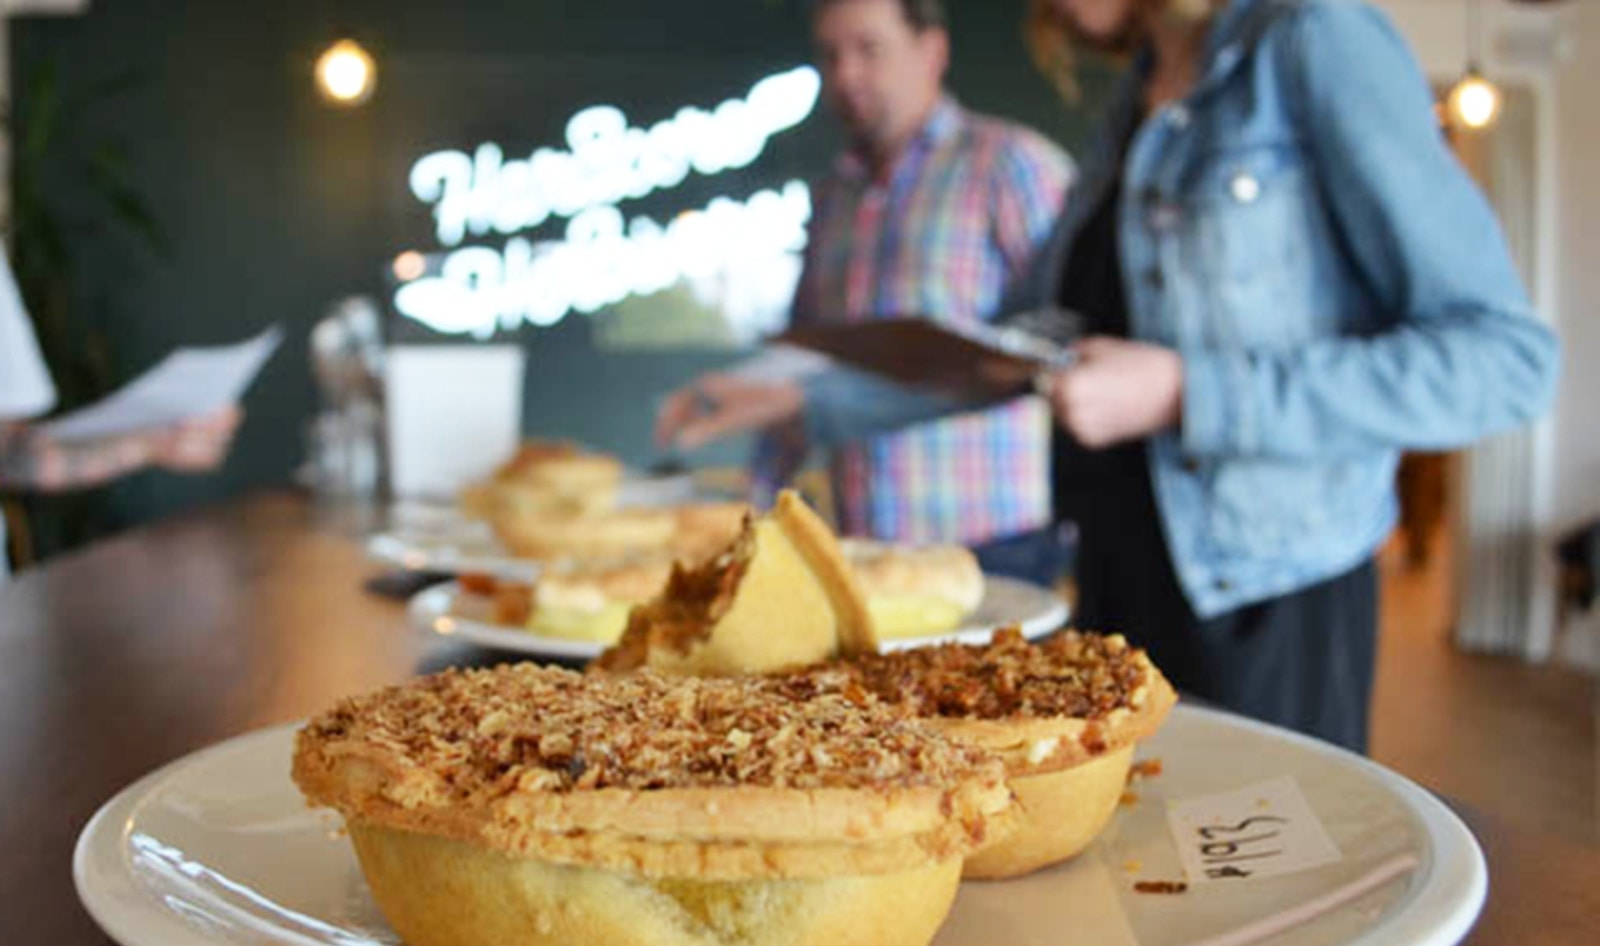 First Annual Vegan Pie Awards Take Place in New Zealand